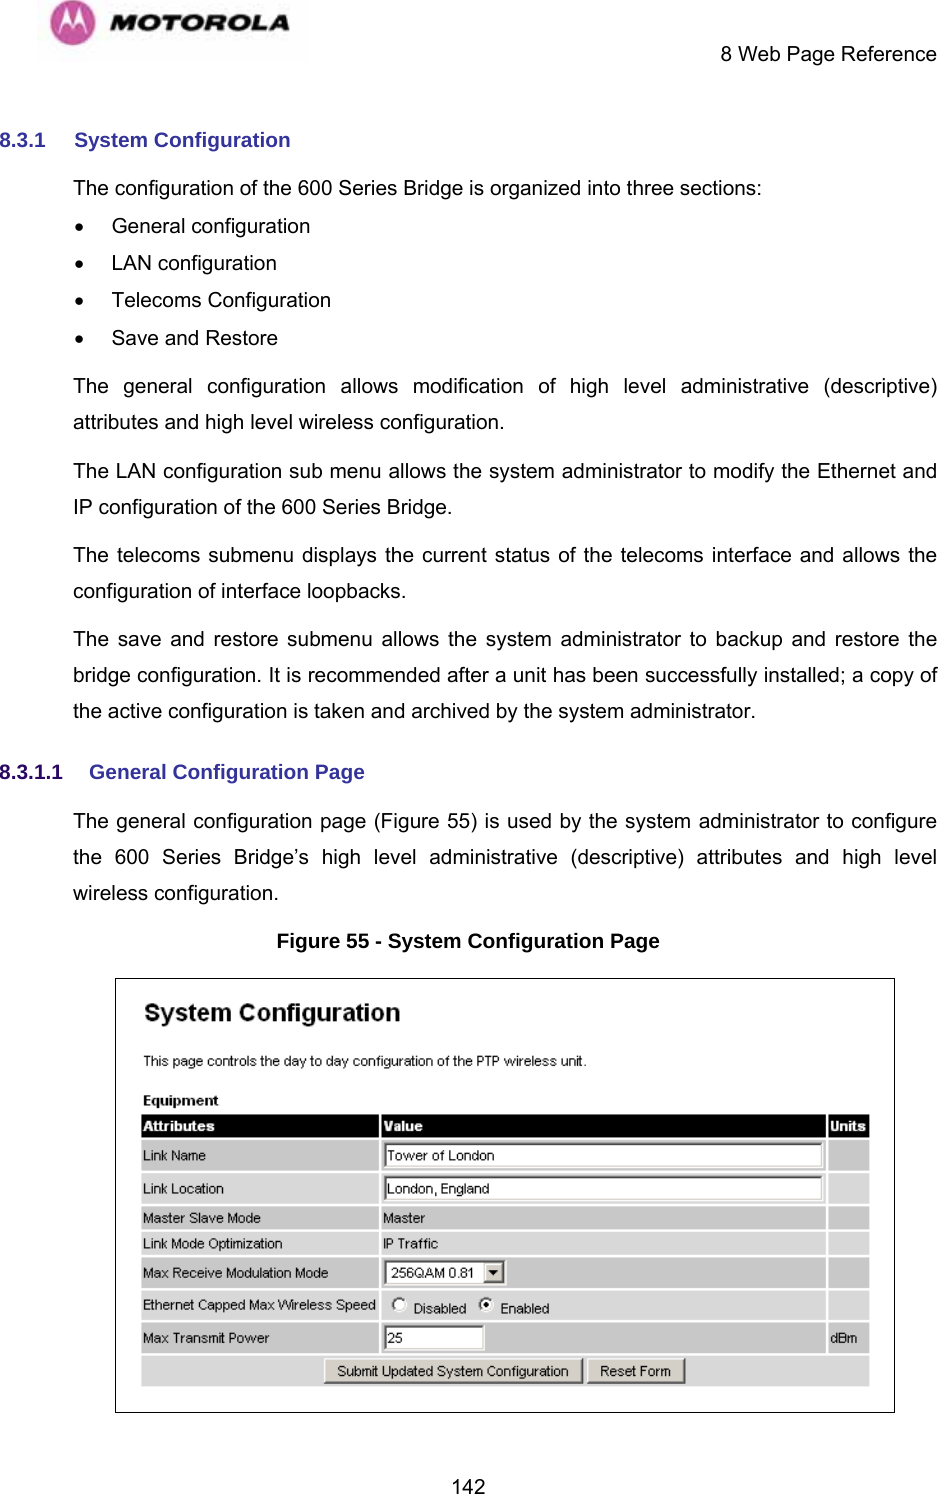     8 Web Page Reference  1428.3.1  System Configuration The configuration of the 600 Series Bridge is organized into three sections: • General configuration • LAN configuration • Telecoms Configuration •  Save and Restore The general configuration allows modification of high level administrative (descriptive) attributes and high level wireless configuration. The LAN configuration sub menu allows the system administrator to modify the Ethernet and IP configuration of the 600 Series Bridge.  The telecoms submenu displays the current status of the telecoms interface and allows the configuration of interface loopbacks. The save and restore submenu allows the system administrator to backup and restore the bridge configuration. It is recommended after a unit has been successfully installed; a copy of the active configuration is taken and archived by the system administrator. 8.3.1.1  General Configuration Page  The general configuration page (Figure 55) is used by the system administrator to configure the 600 Series Bridge’s high level administrative (descriptive) attributes and high level wireless configuration. Figure 55 - System Configuration Page  